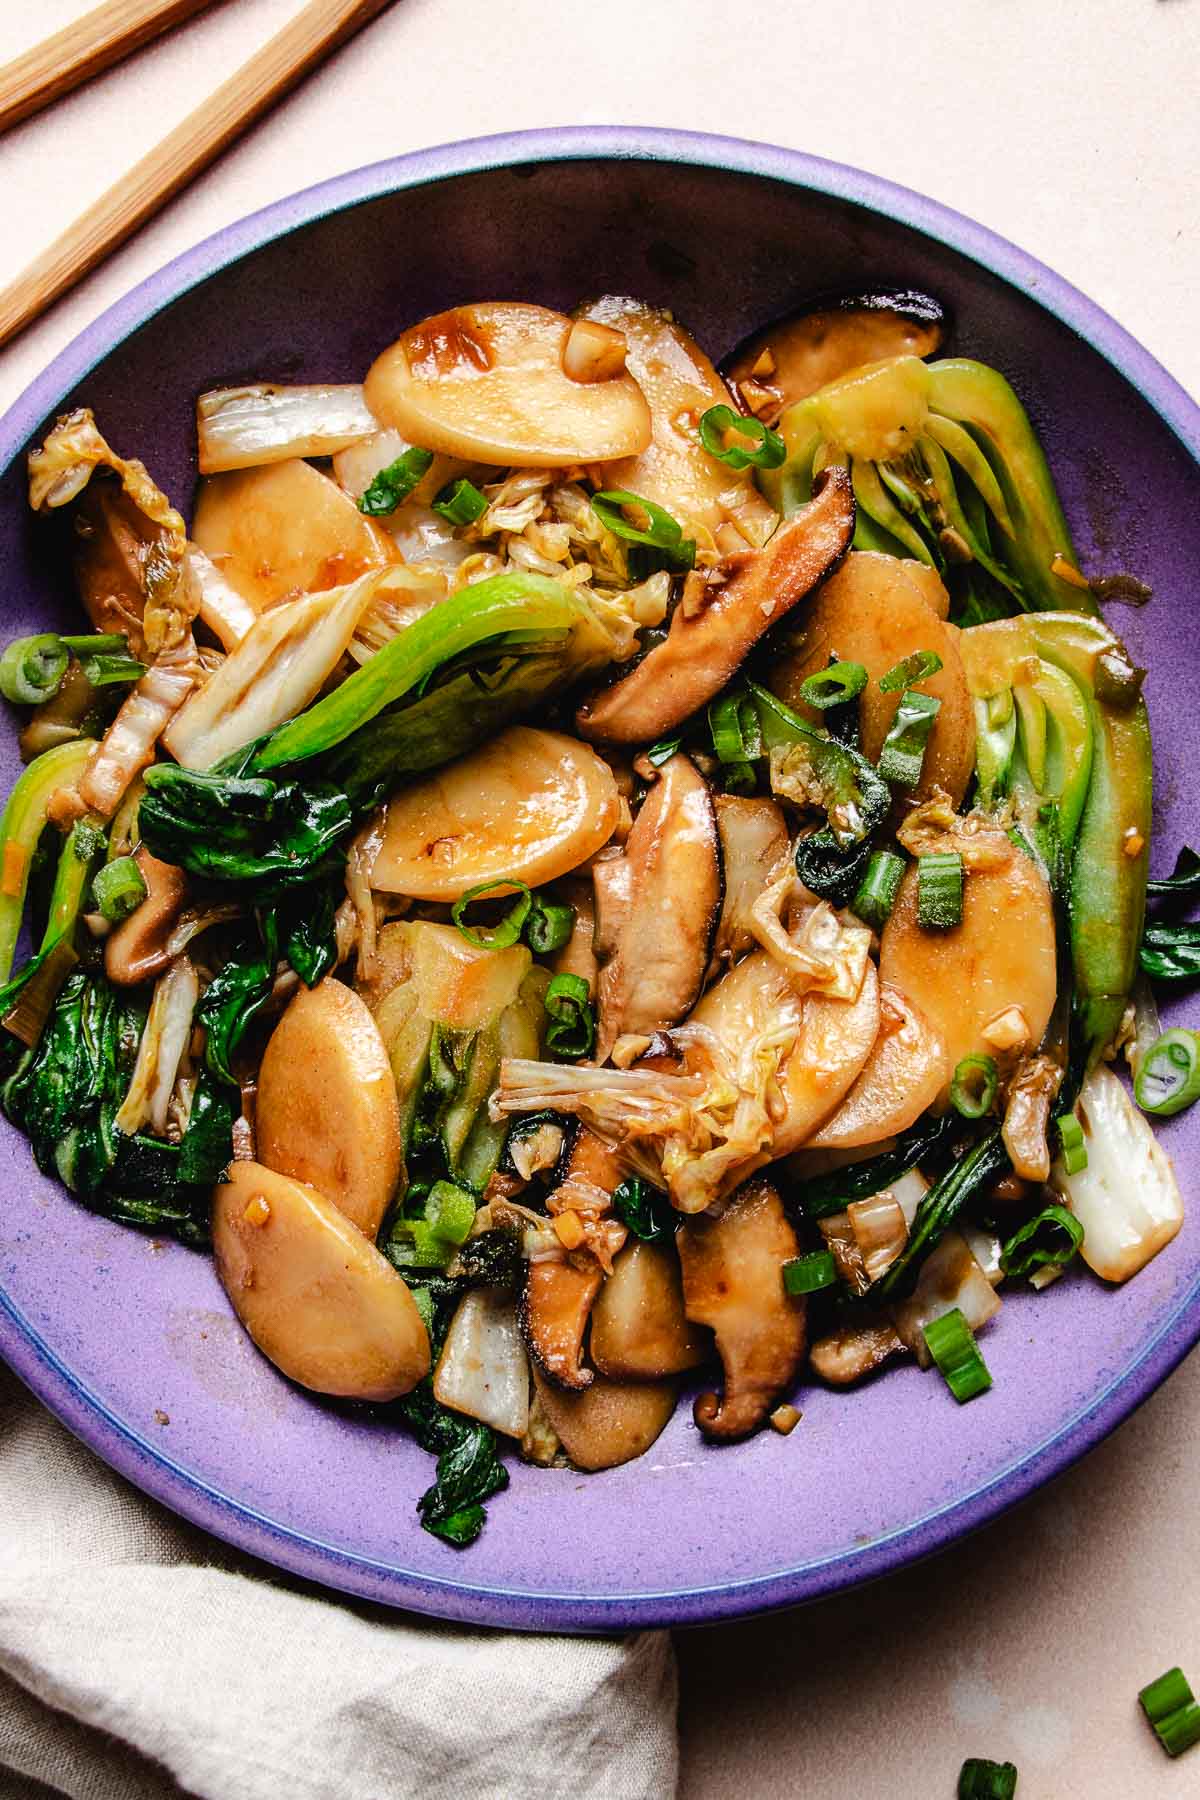 Image shows stir fried Shanghai rice cake with napa cabbage and bok choy in Asian brown sauce on a purple color plate.